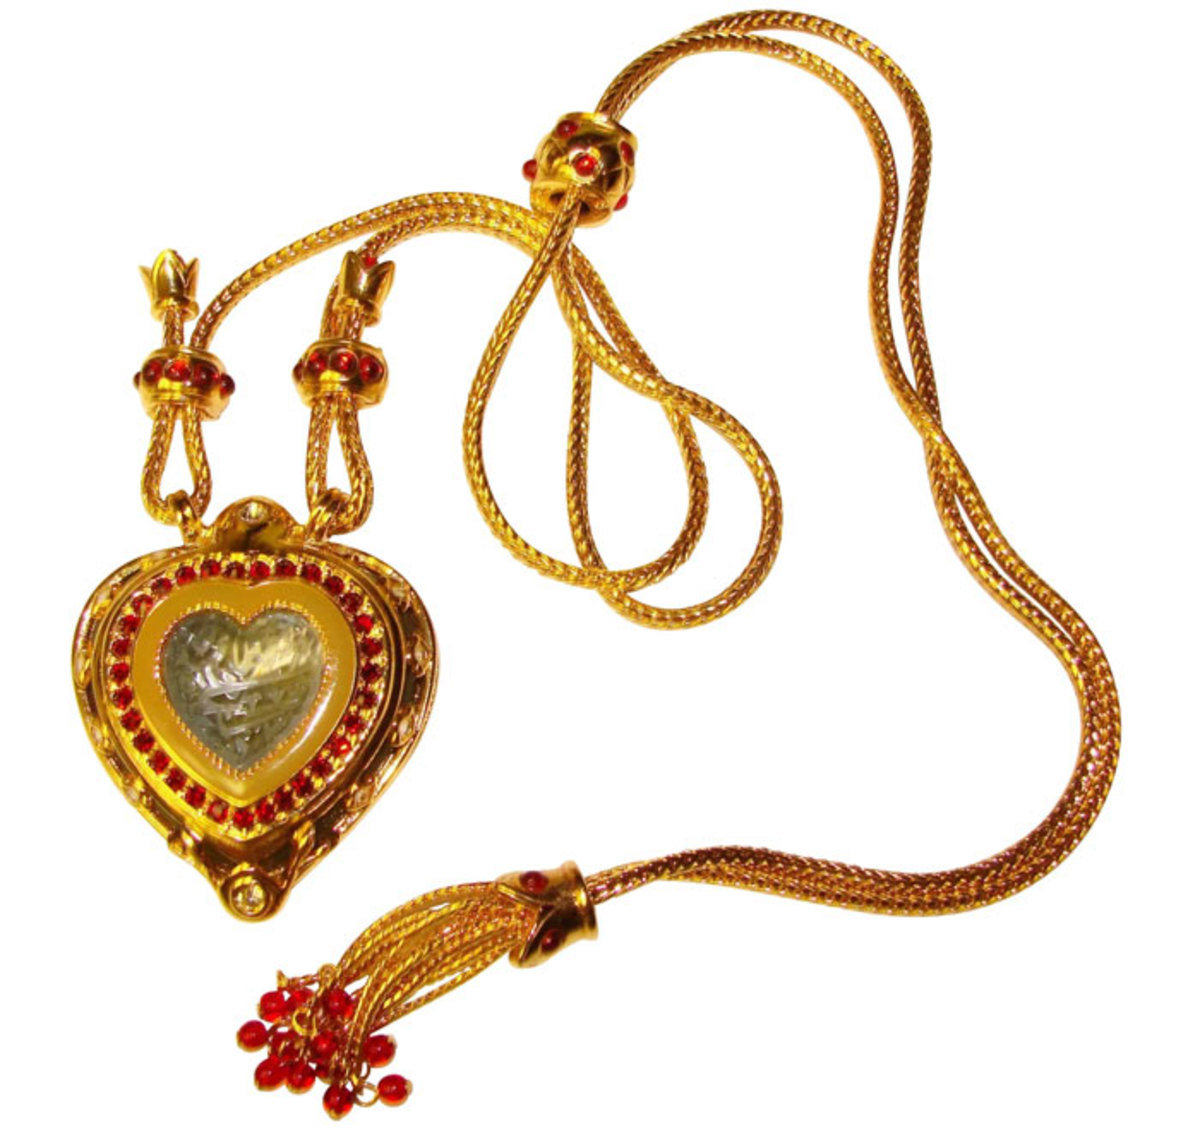 The Shah Jehan heart pendant necklace Taylor designed for Avon in the 1990s, based on the one Burton gave her.